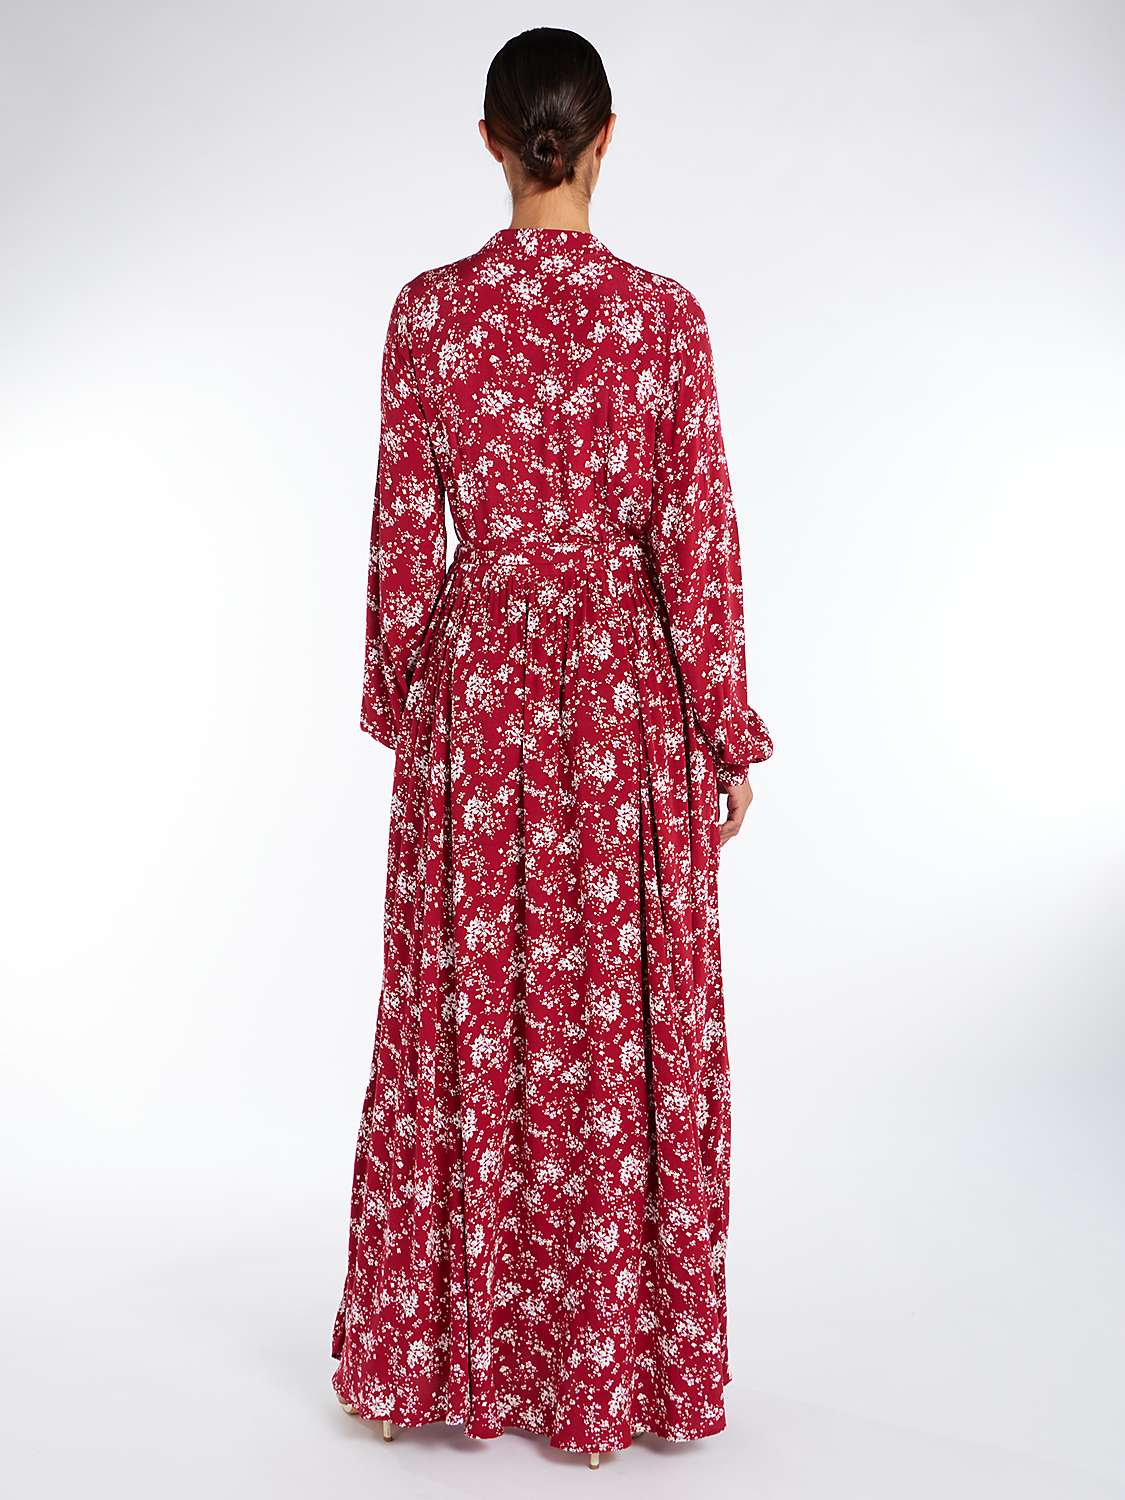 Buy Aab Freesia Maxi Dress, Red/Multi Online at johnlewis.com